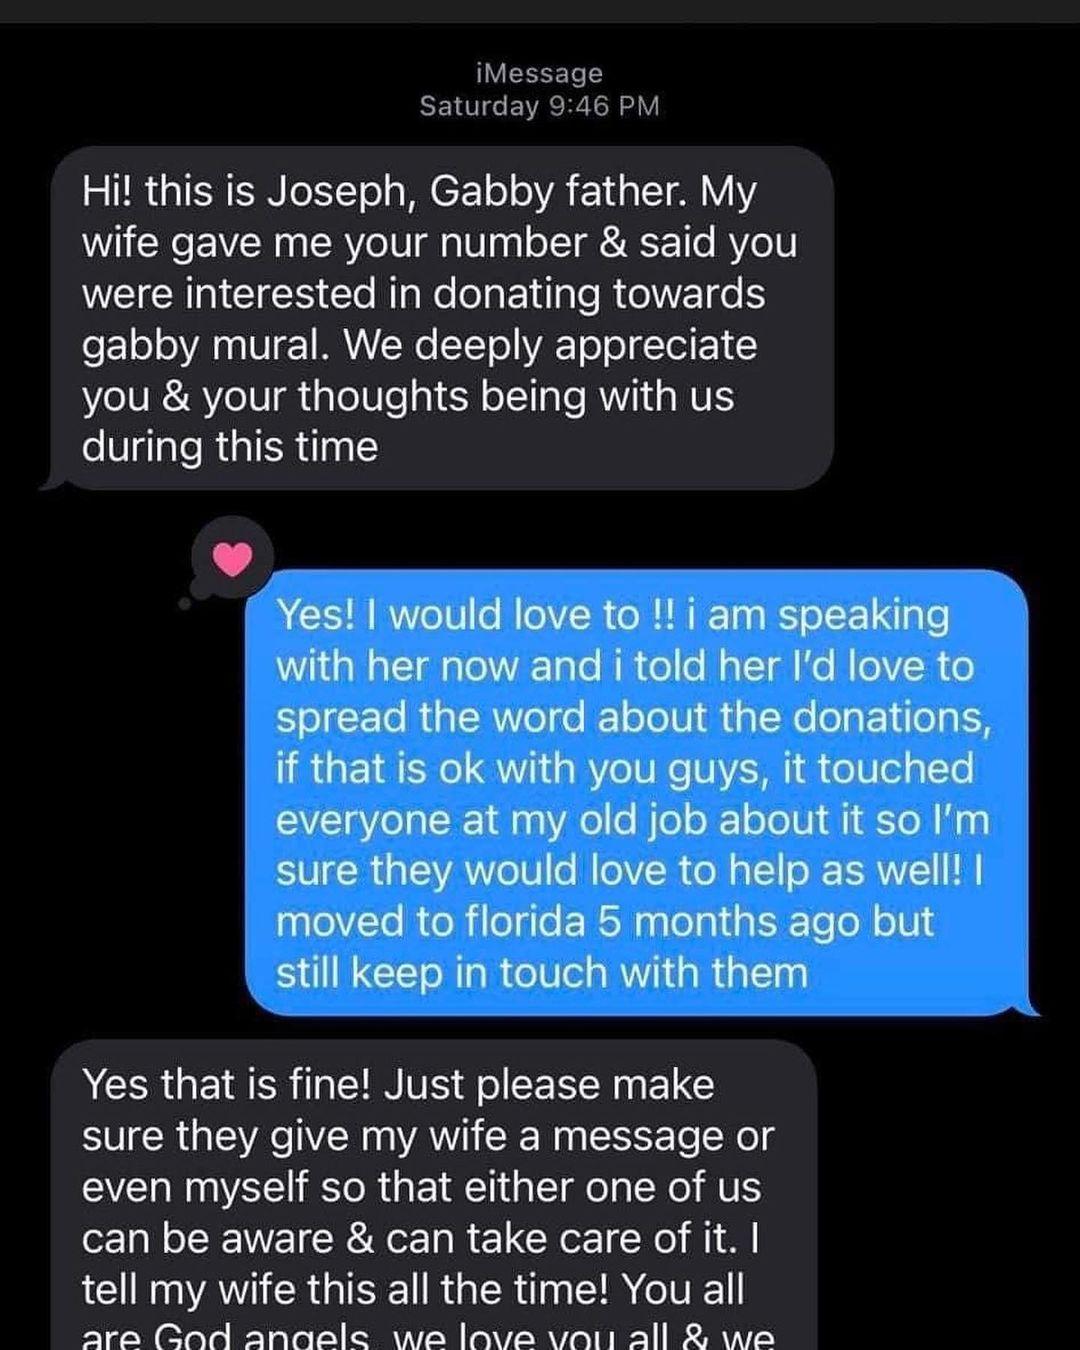 Scammer impersonating Gabby Petito's father